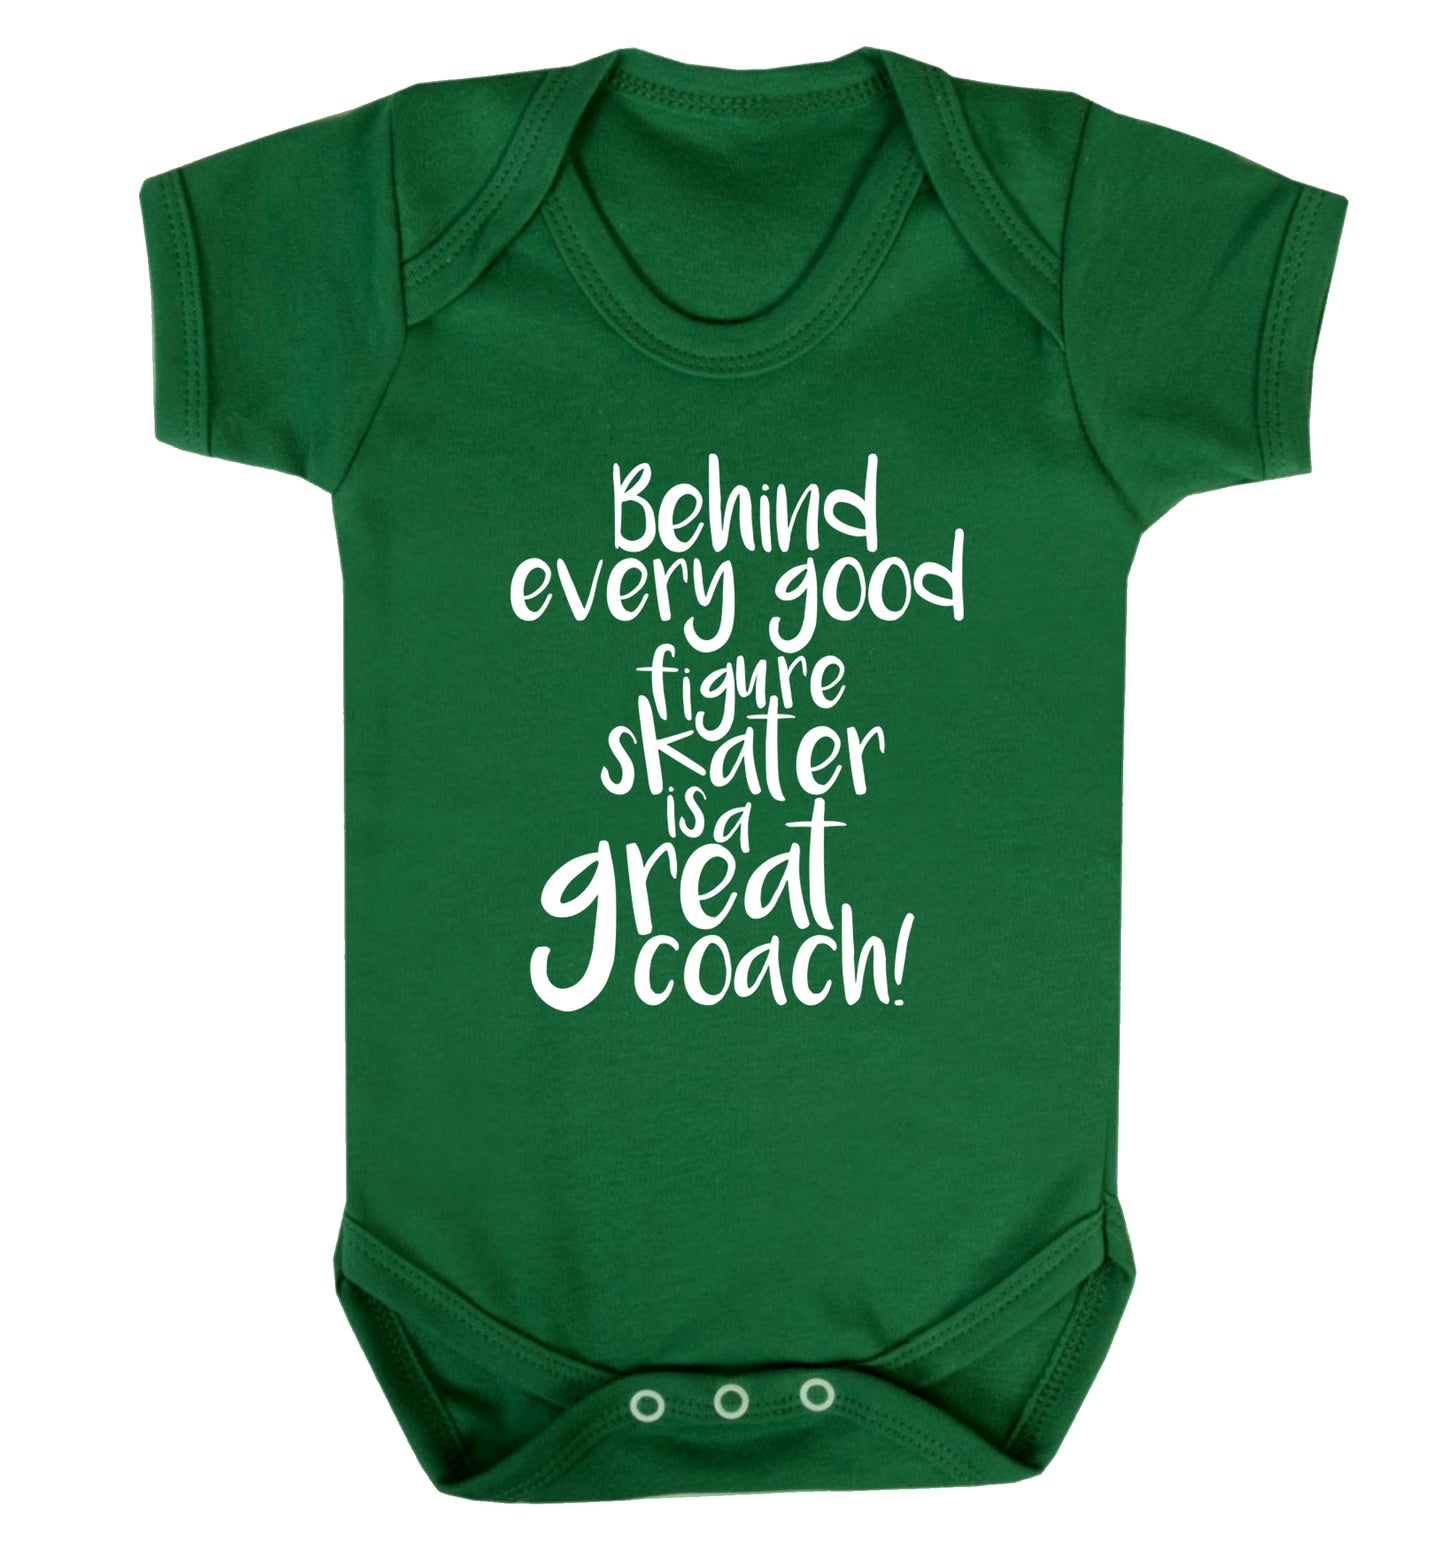 Behind every good figure skater is a great coach Baby Vest green 18-24 months